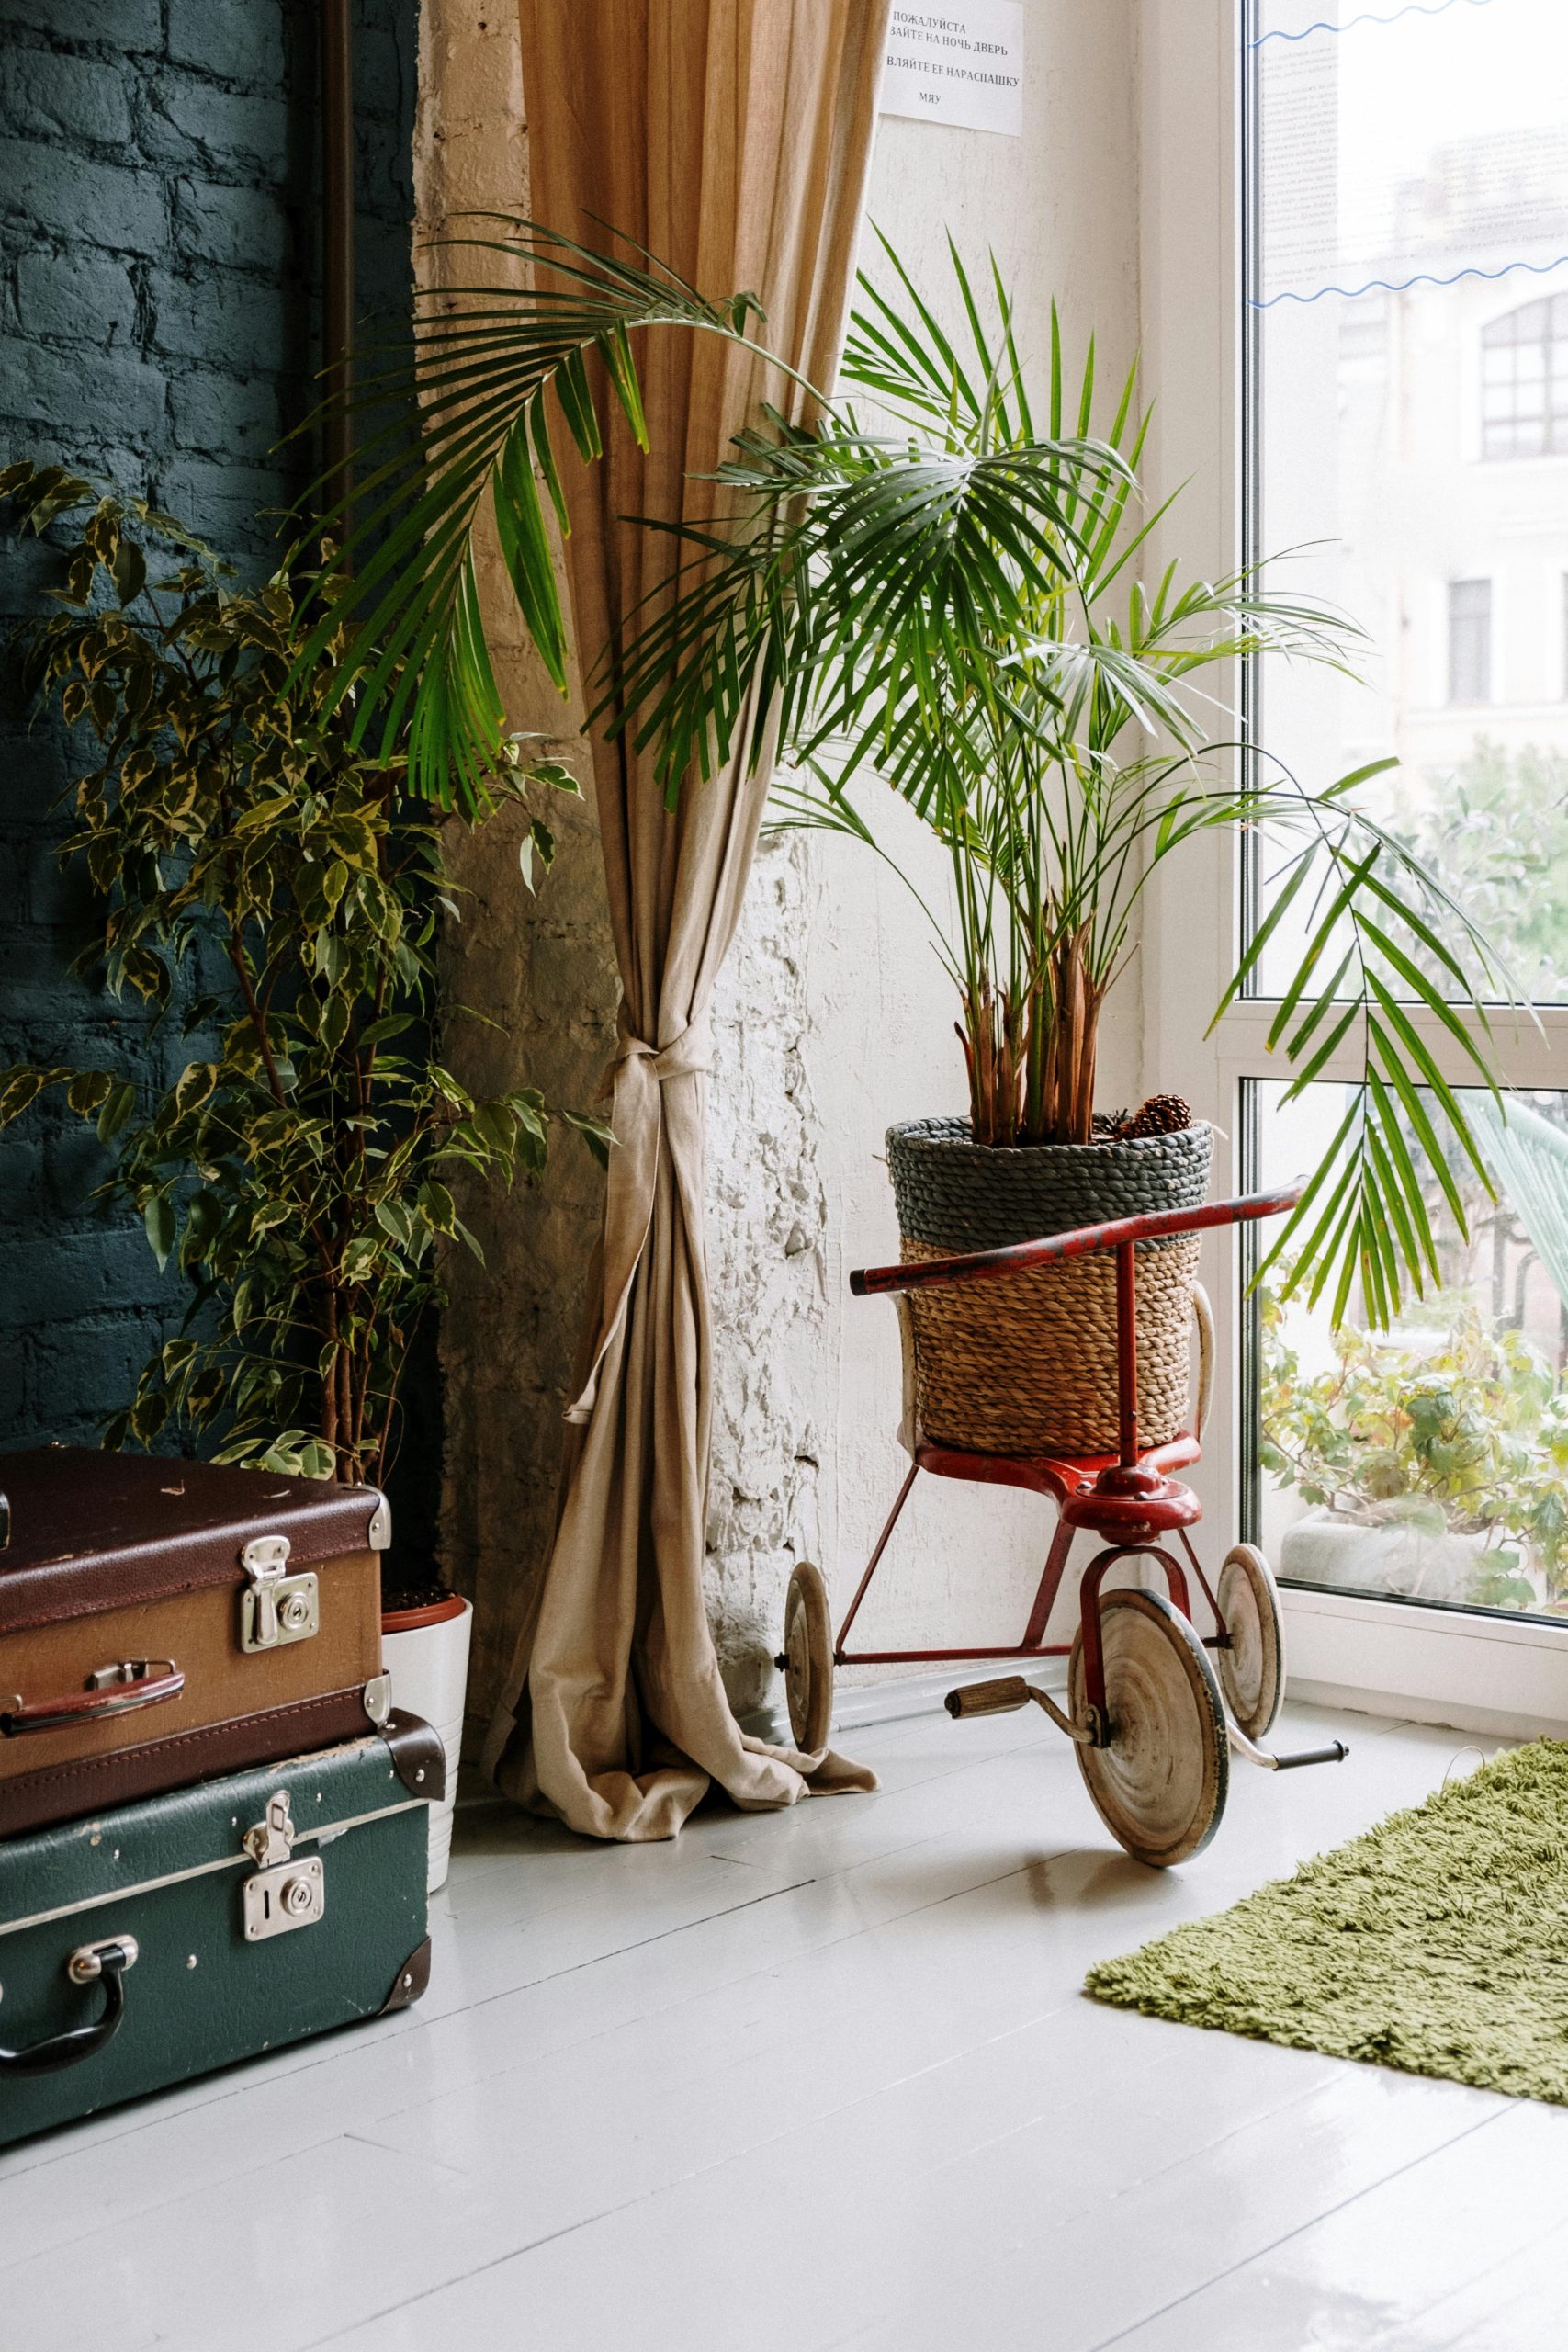 Transform your home into a sanctuary with indoor plants